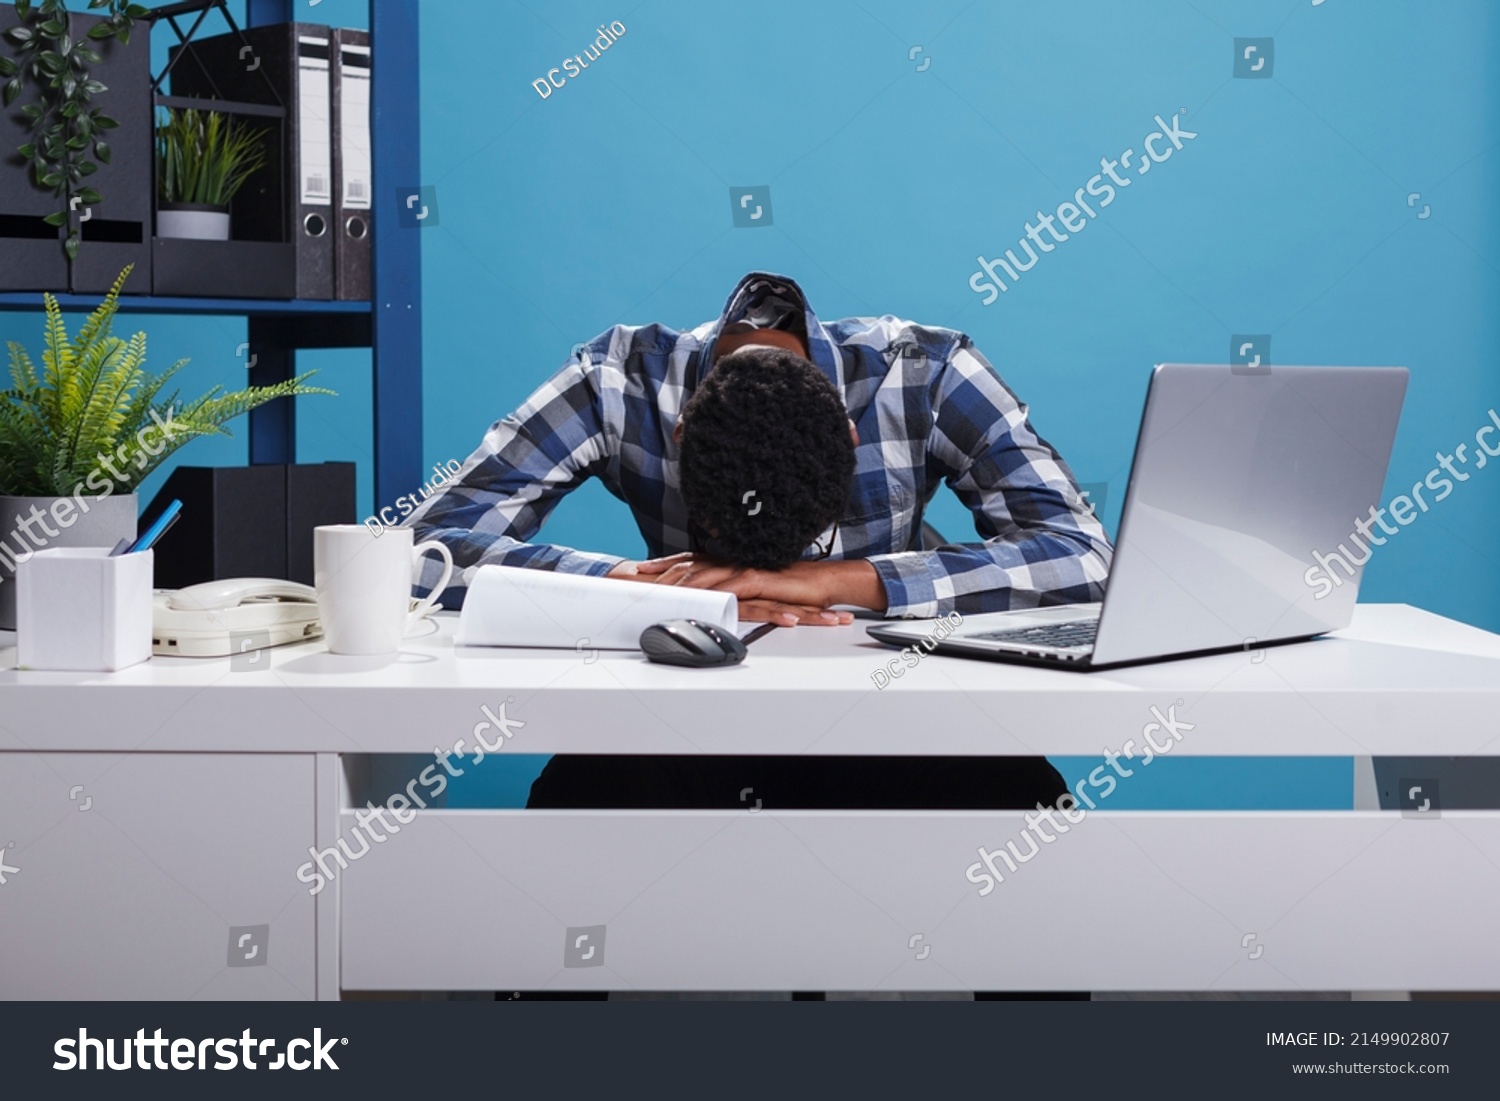 Exhausted and tired young adult office worker falling asleep on desk because of overtime work hours. Burnout fatigued company employee being sleepy and stressed because of huge work effort. #2149902807